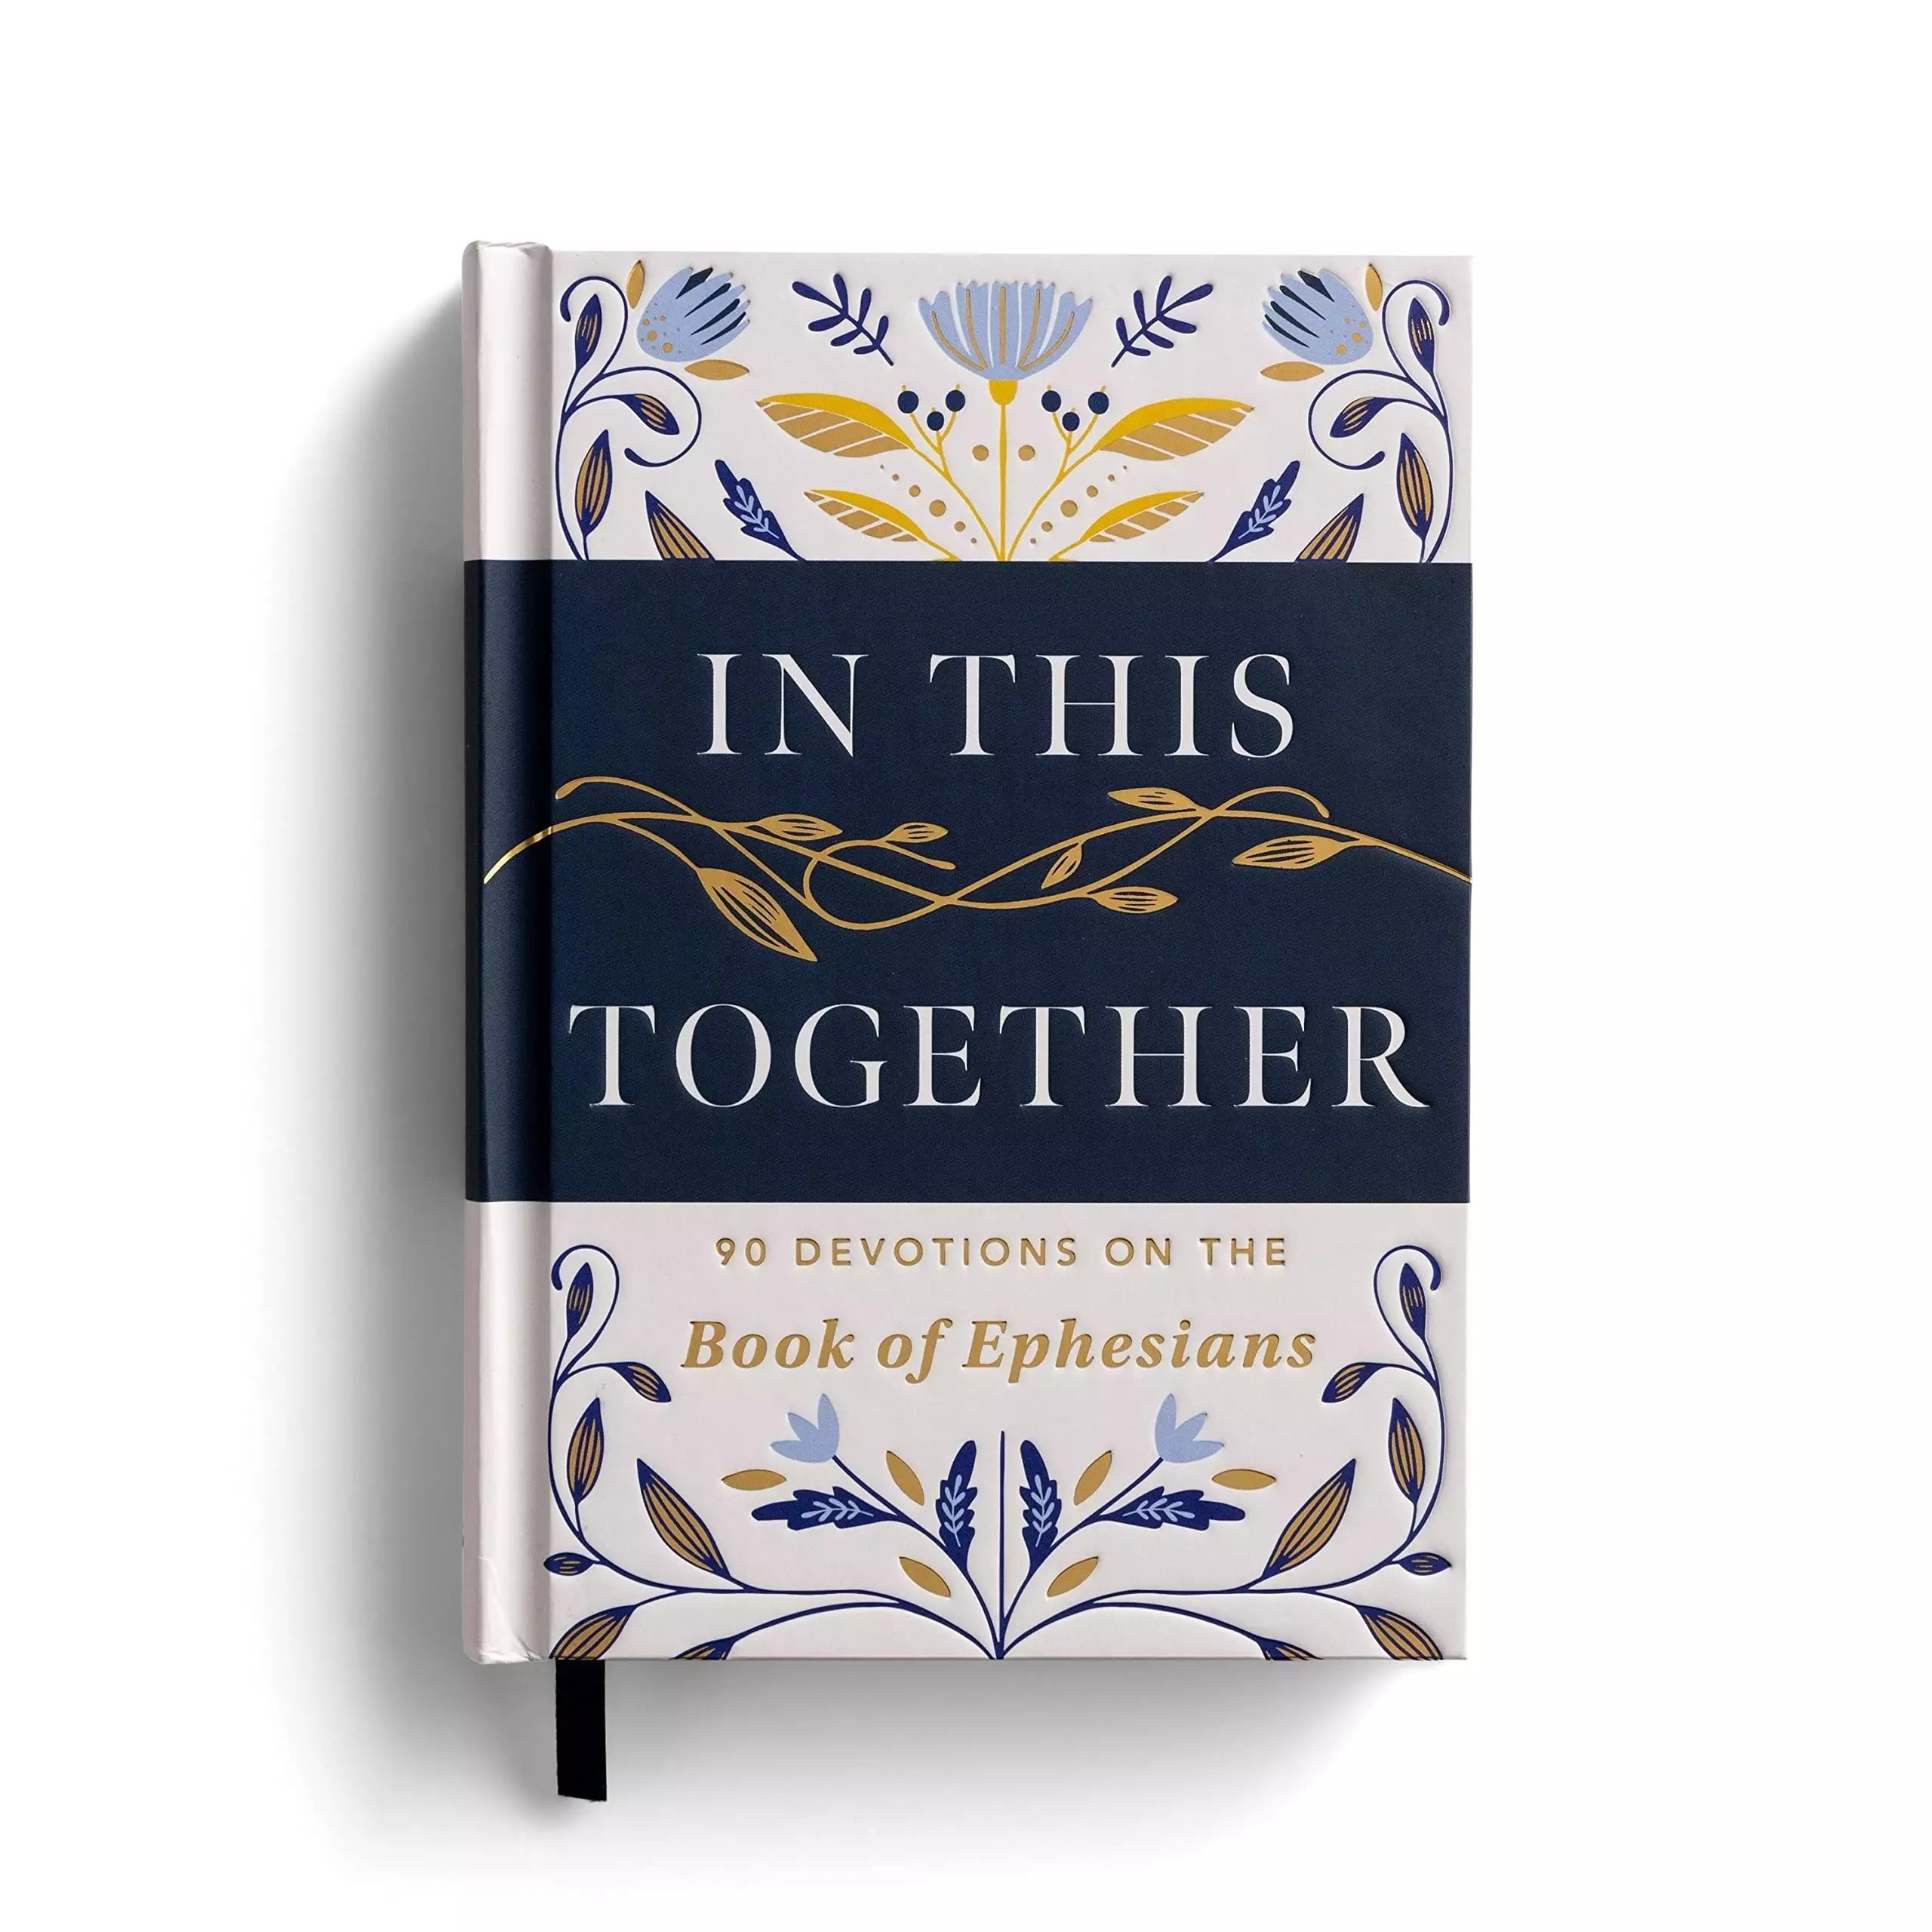 In This Together​: 90 Devotions on the Book of Ephesians ​